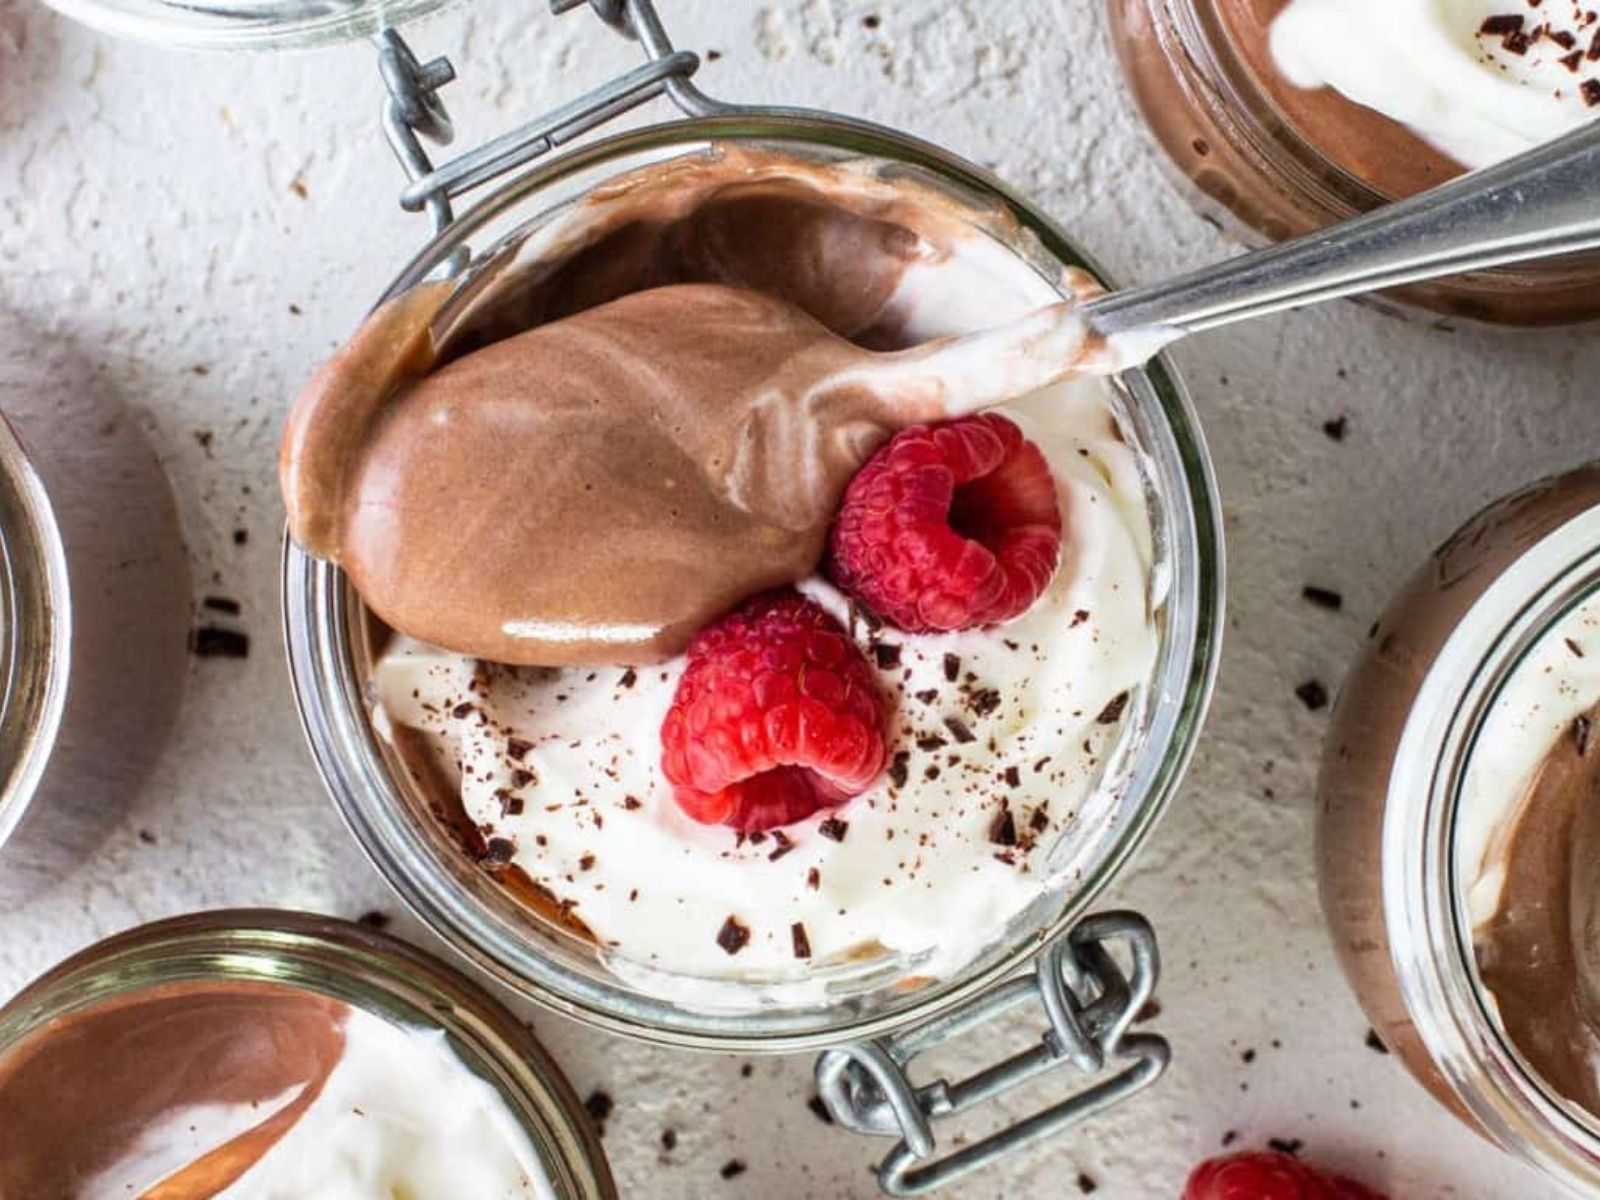 Cottage Cheese Recipes, Chocolate Mousse, Courtesy of Fit Foodie Finds